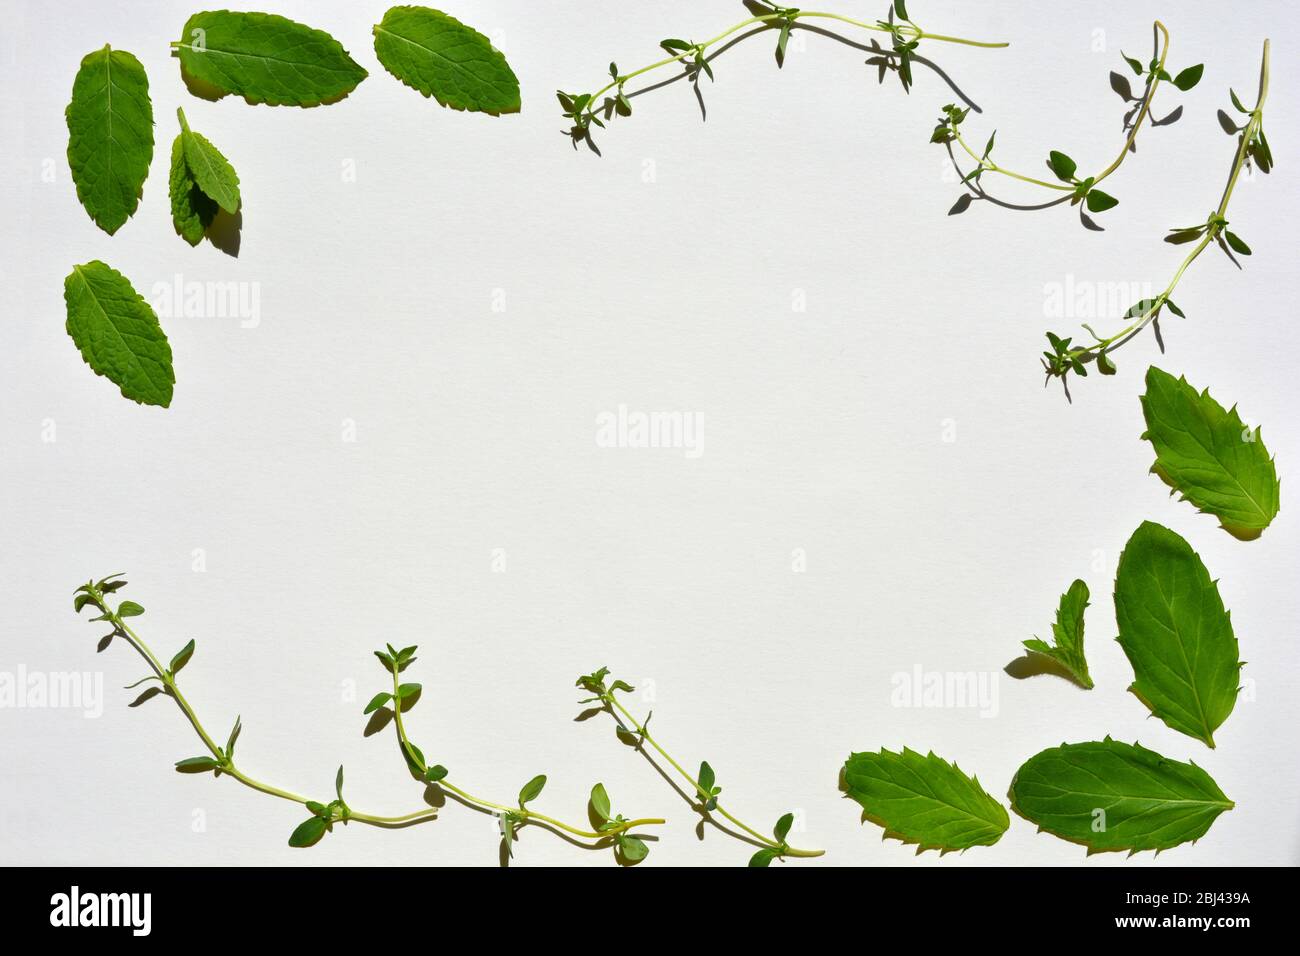 Spearmint, Peppermint and Thyme, fresh leaves isolated on white background Stock Photo